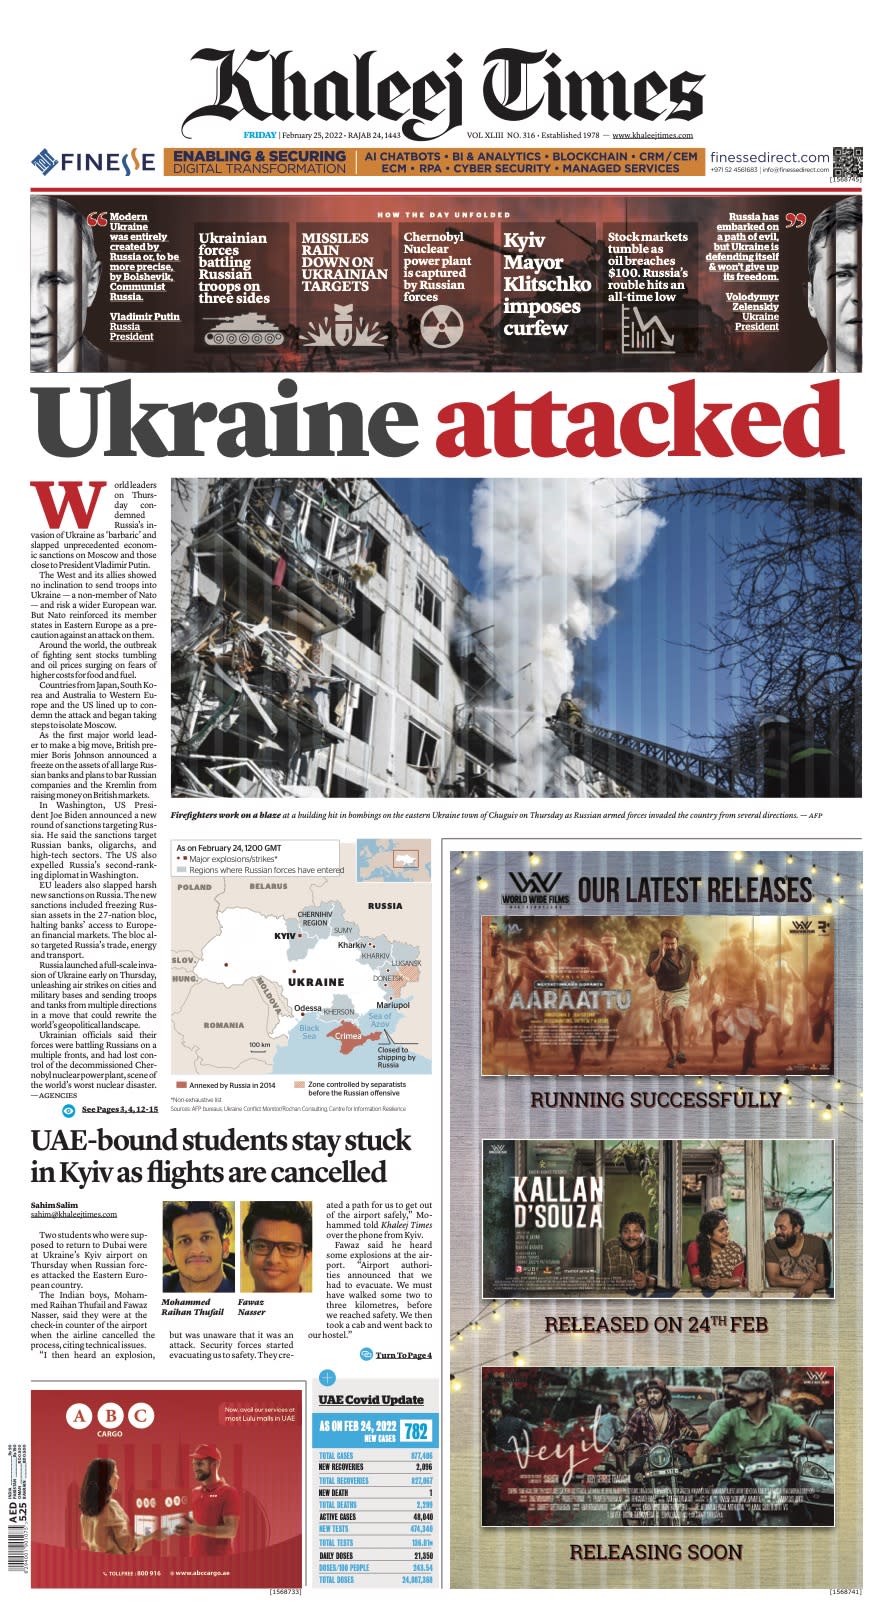 Newspaper Coverage of Russian Forces Invading Ukraine